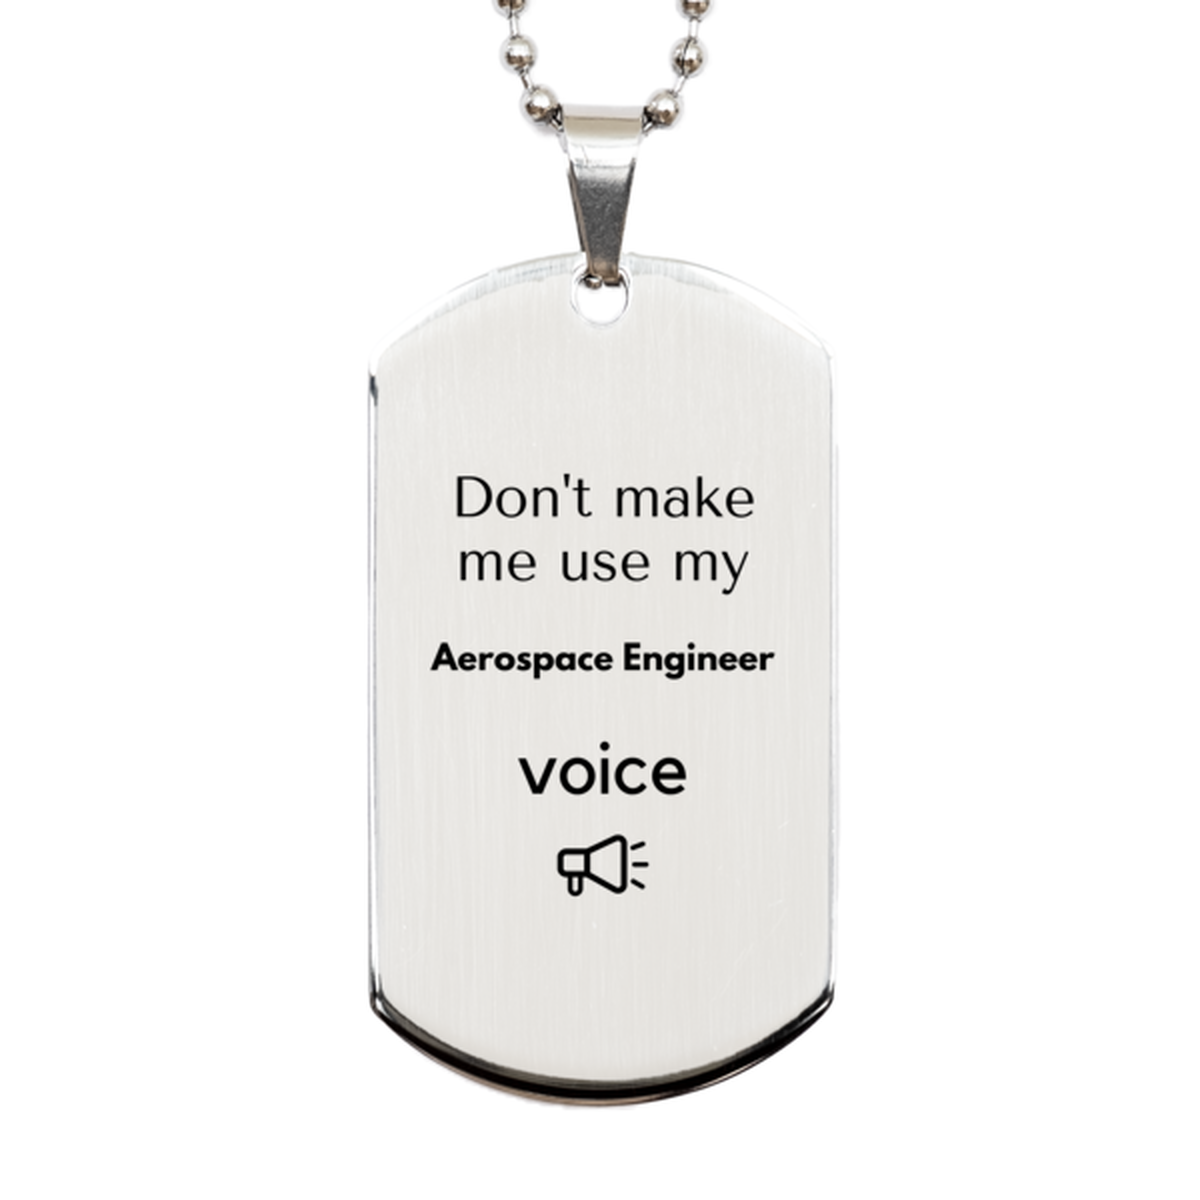 Don't make me use my Aerospace Engineer voice, Sarcasm Aerospace Engineer Gifts, Christmas Aerospace Engineer Silver Dog Tag Birthday Unique Gifts For Aerospace Engineer Coworkers, Men, Women, Colleague, Friends